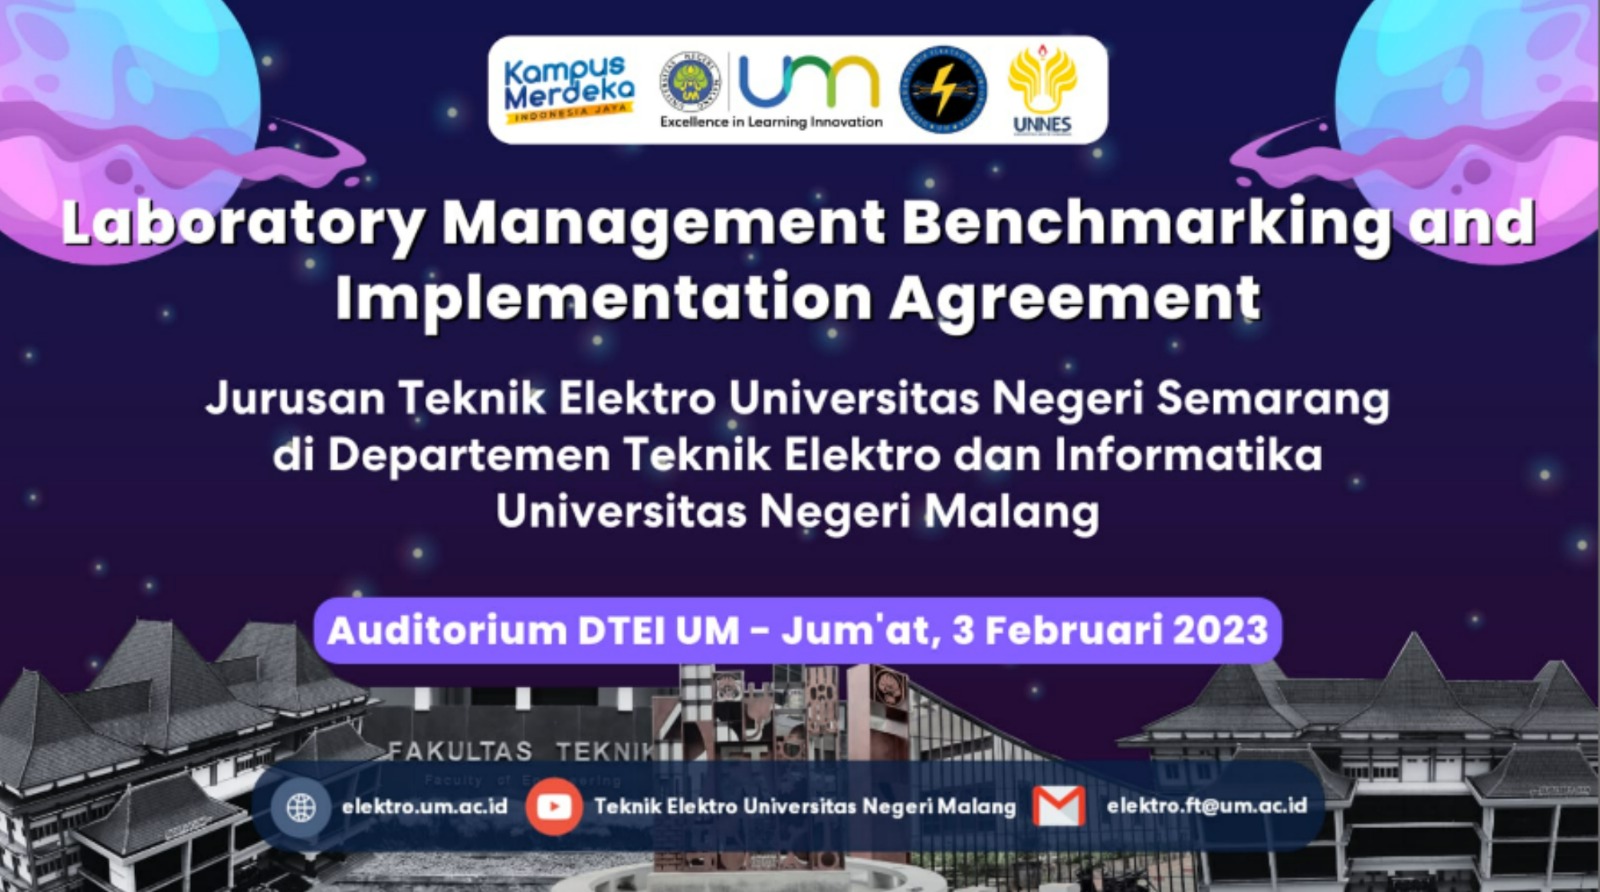 Laboratory Management Benchmarking and Implementation Agreement